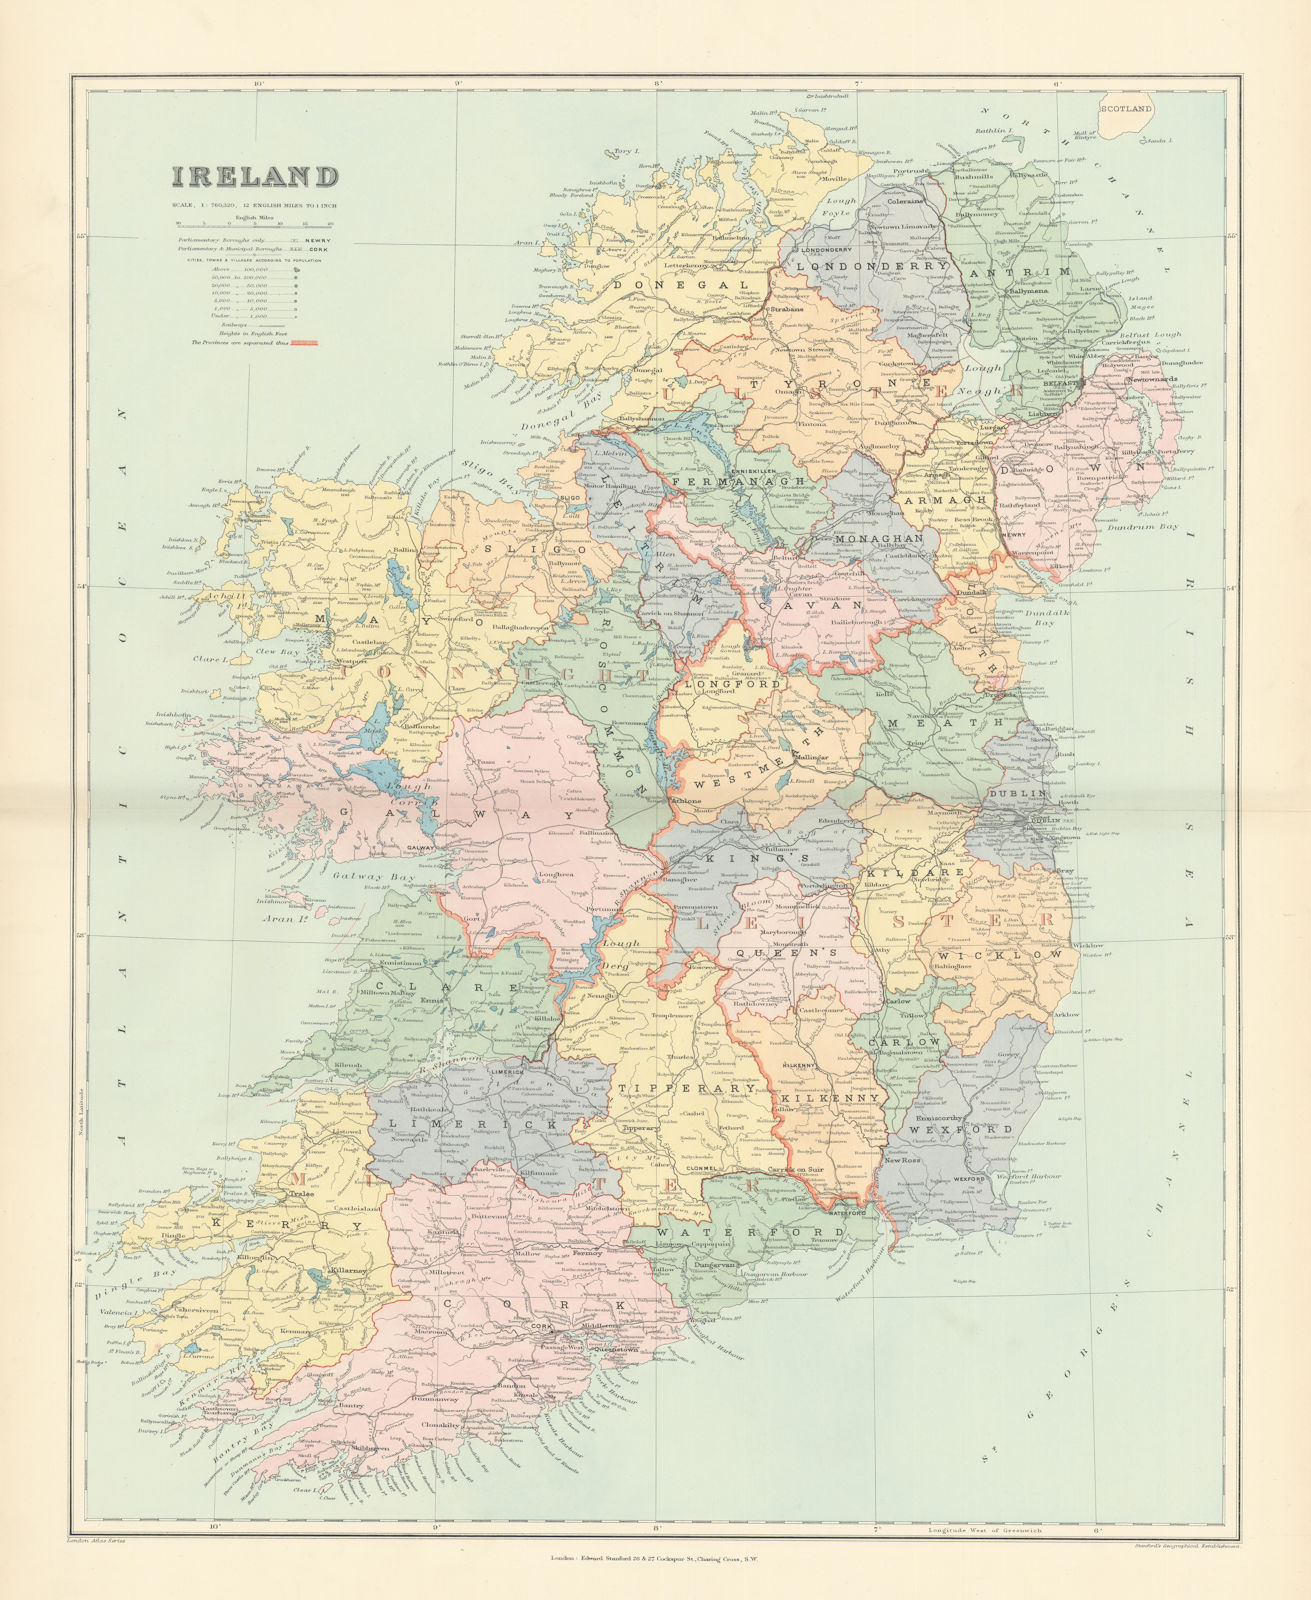 Ireland. Counties, railways & provinces. Large 64x52cm. STANFORD 1896 old map